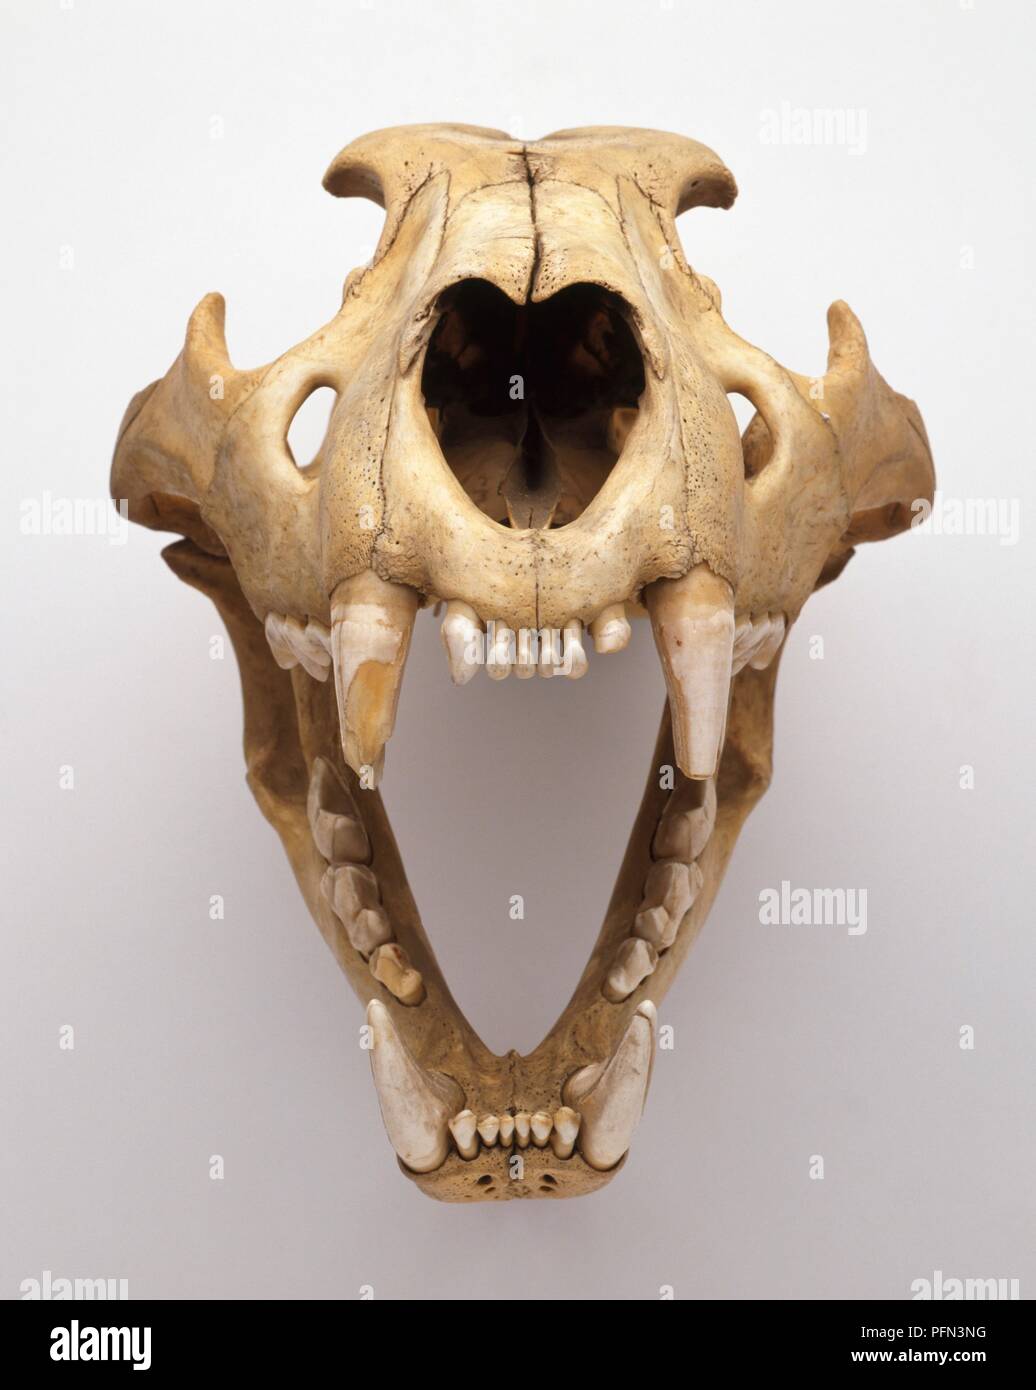 Skull of Lion (Panthera leo) with open jaw showing teeth Stock Photo